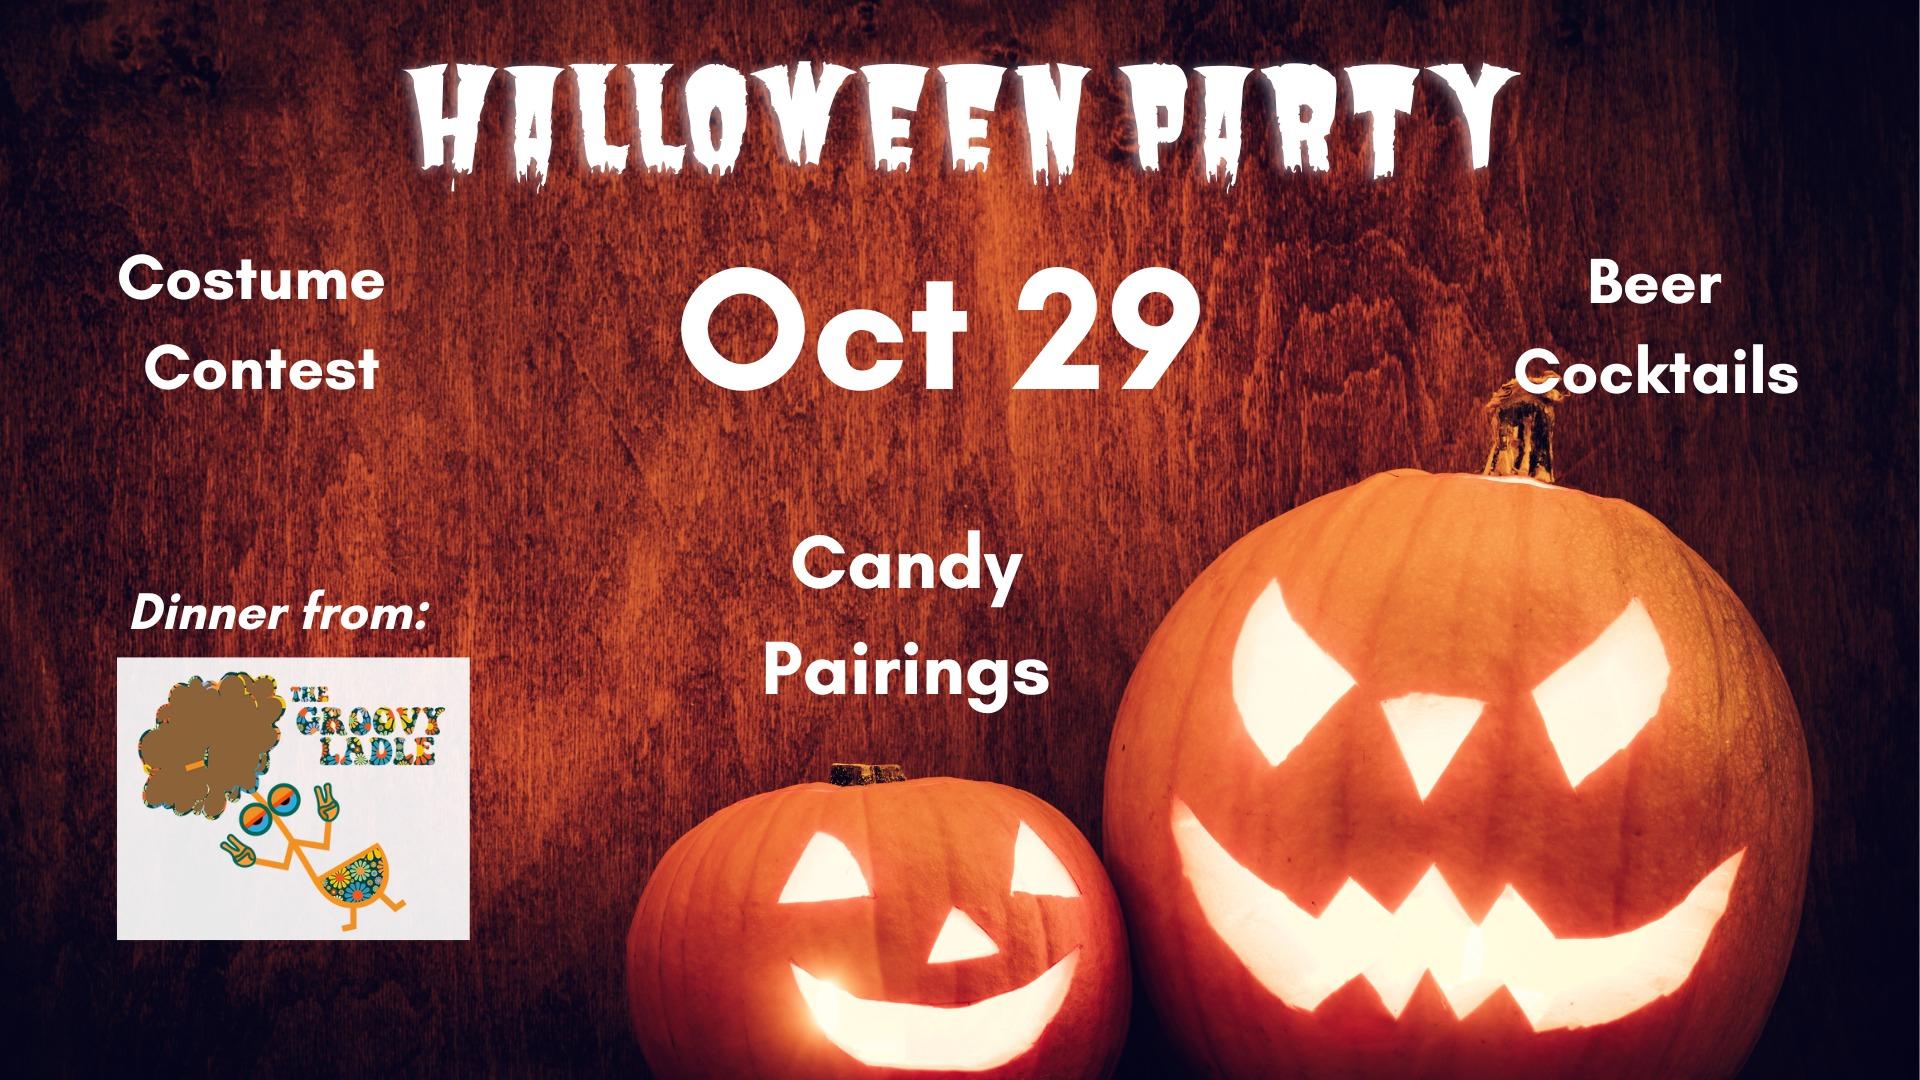 Halloween Party at Jax Craft Beer
Sat Oct 29, 5:00 PM - Sun Oct 30, 12:00 AM
in 9 days